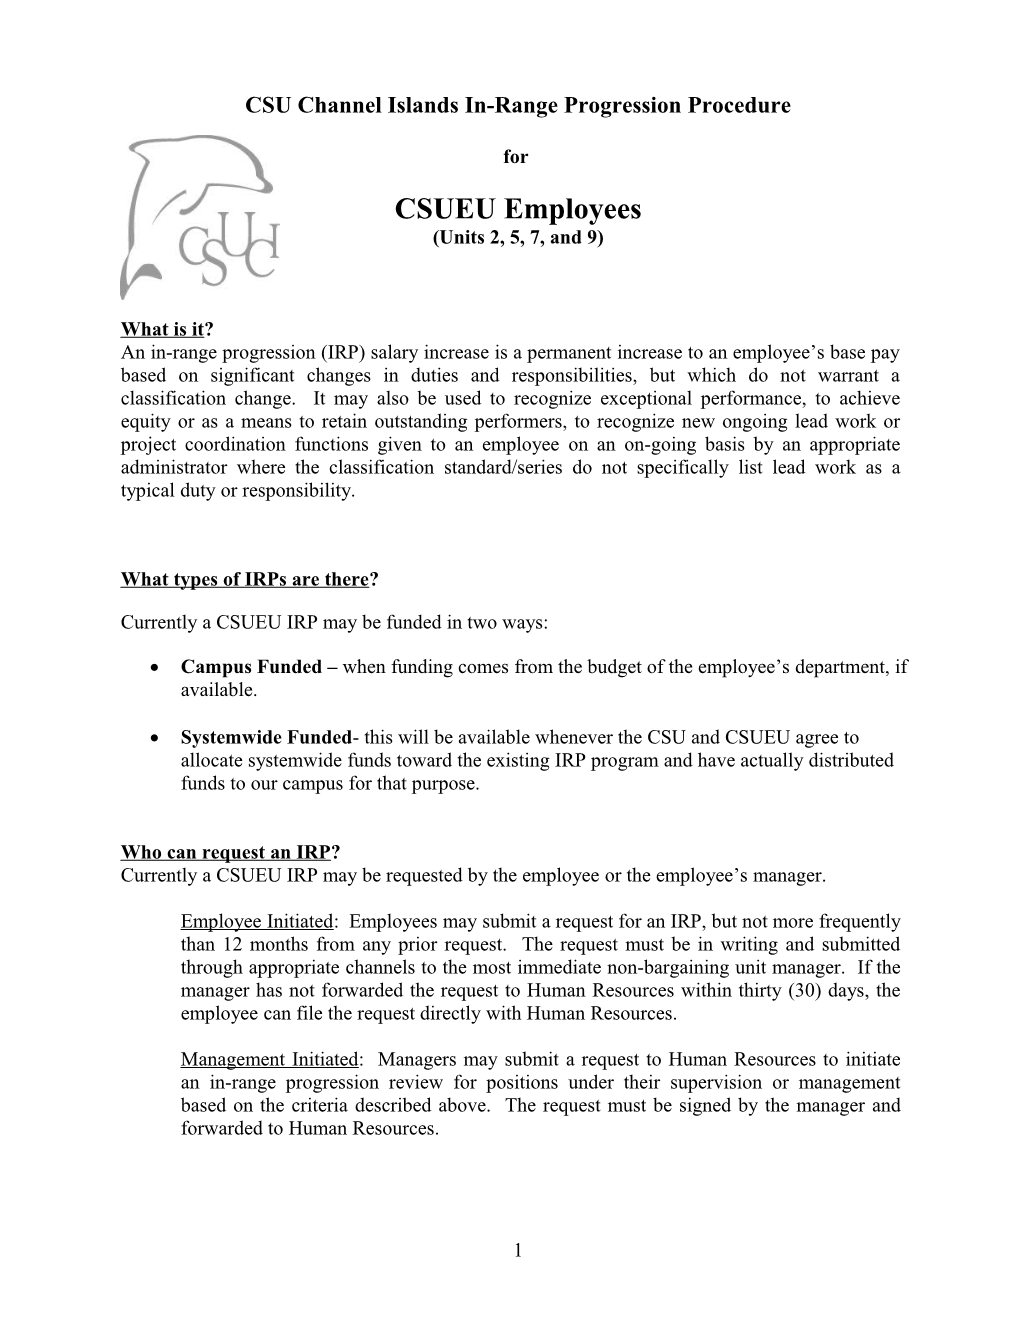 Subject: Systemwide Funded In-Range Progression CSUEU (Units 2, 5, 7, and 9) Employees